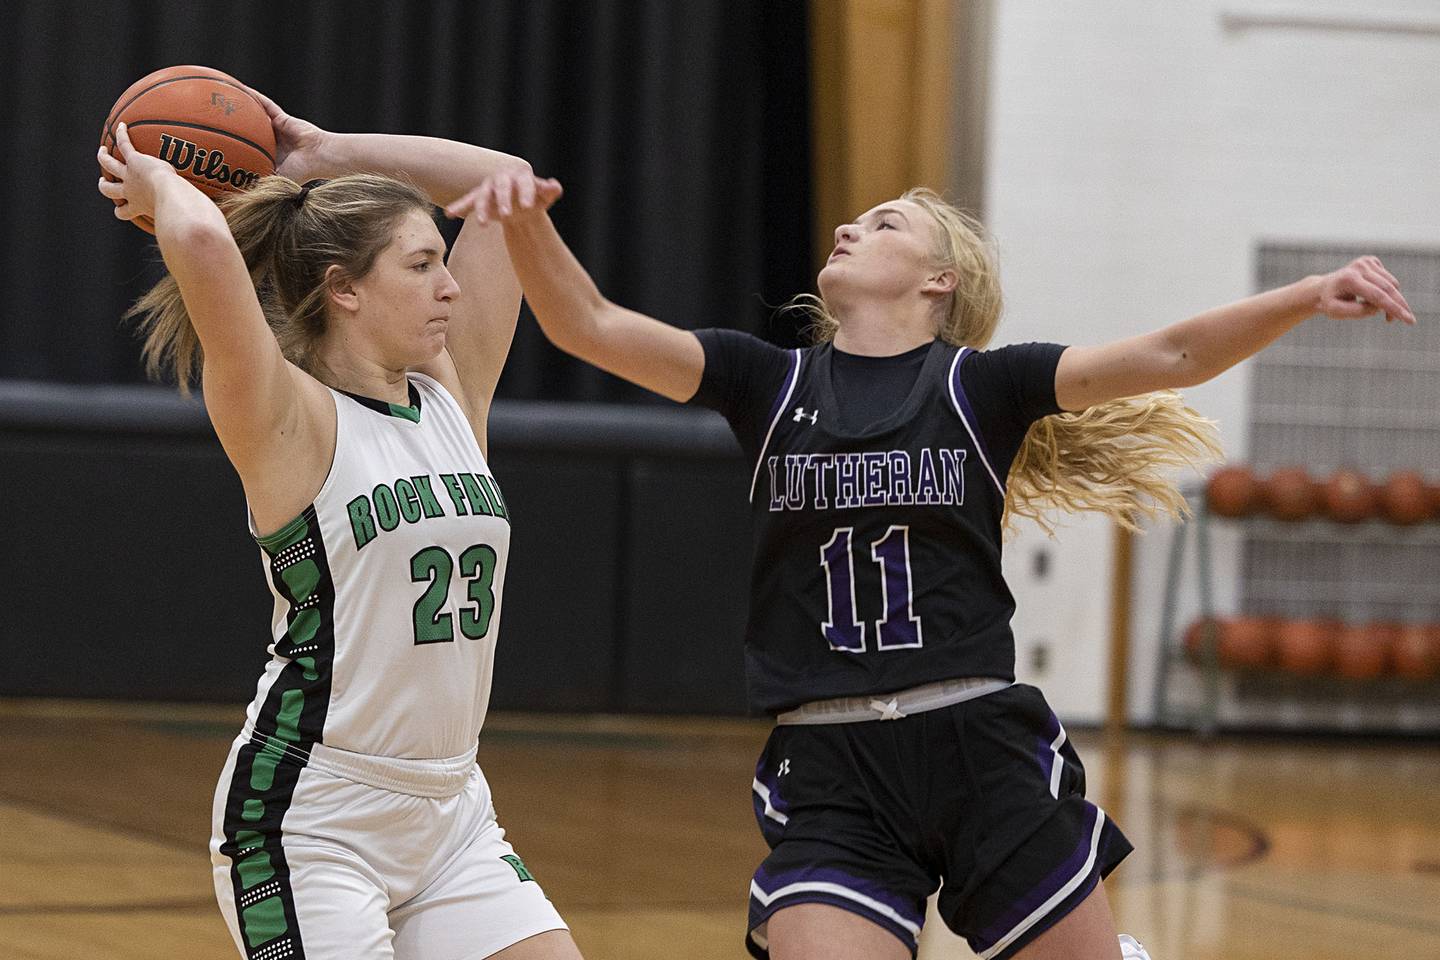 Rock Falls’ Claire Bickett looks to pass while being guarded by Rockford Lutheran’s Sydney Carlson Friday, Jan. 27, 2023.